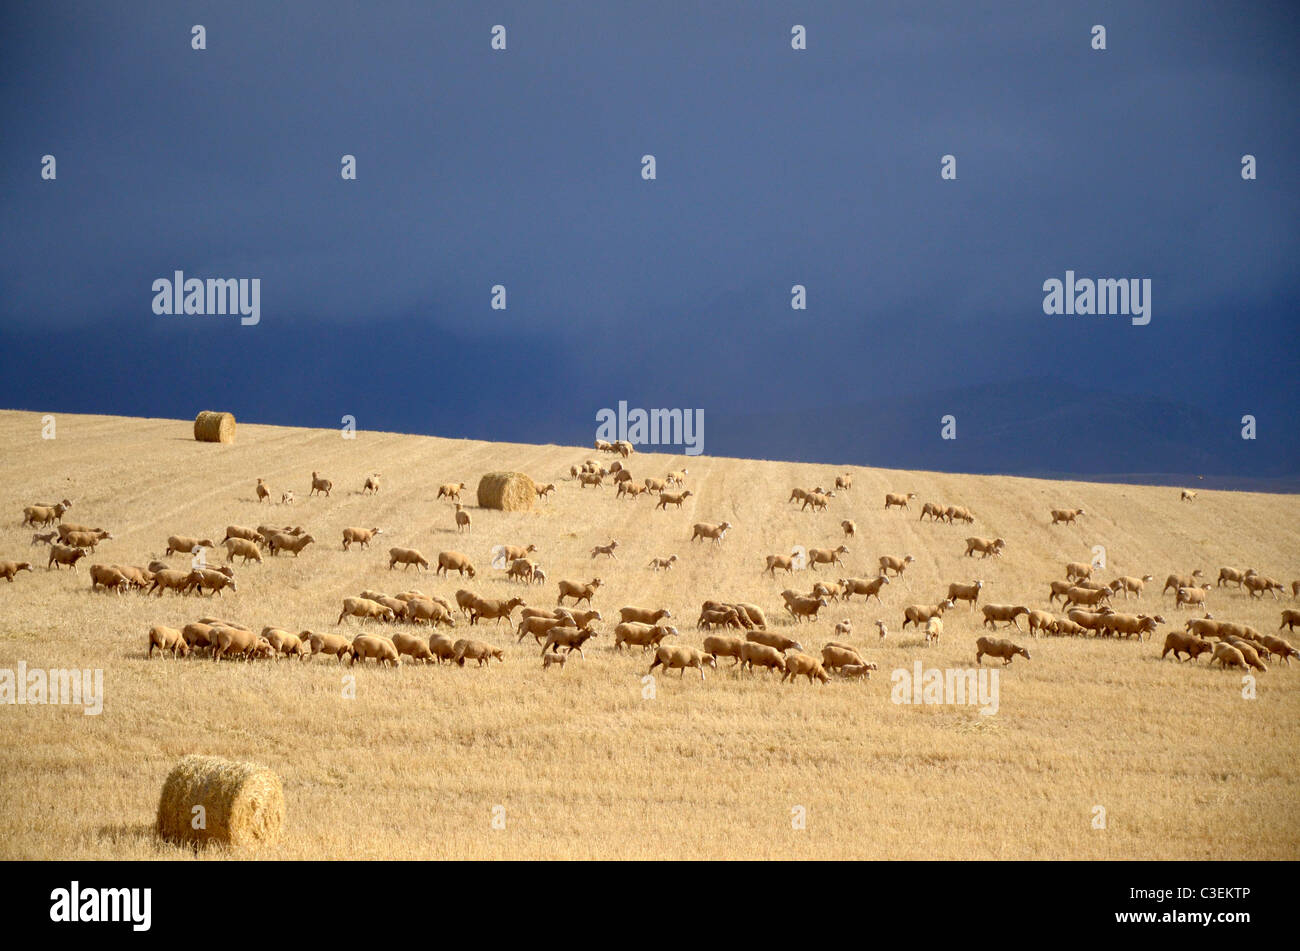 South African landscapes include desert, grassland, and mountains. Sheep in wheat field with blue stormy clouds Overberg Stock Photo